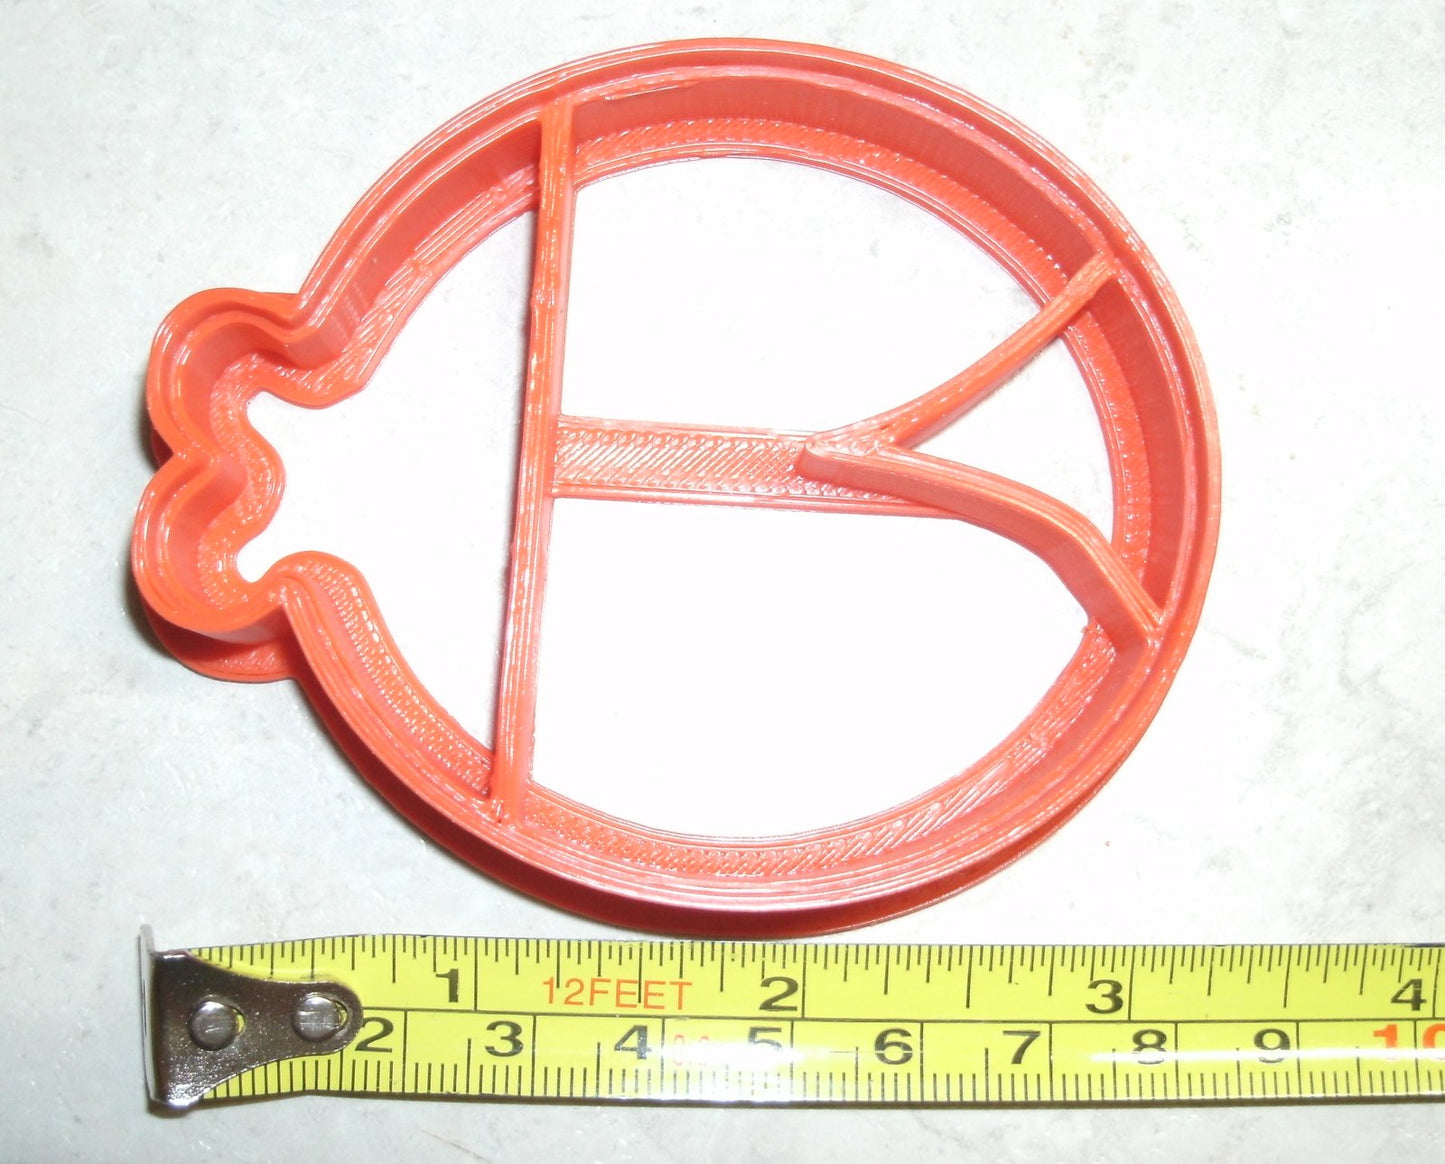 Ladybug Ladybird Beetle Special Occasion Cookie Cutter USA PR632